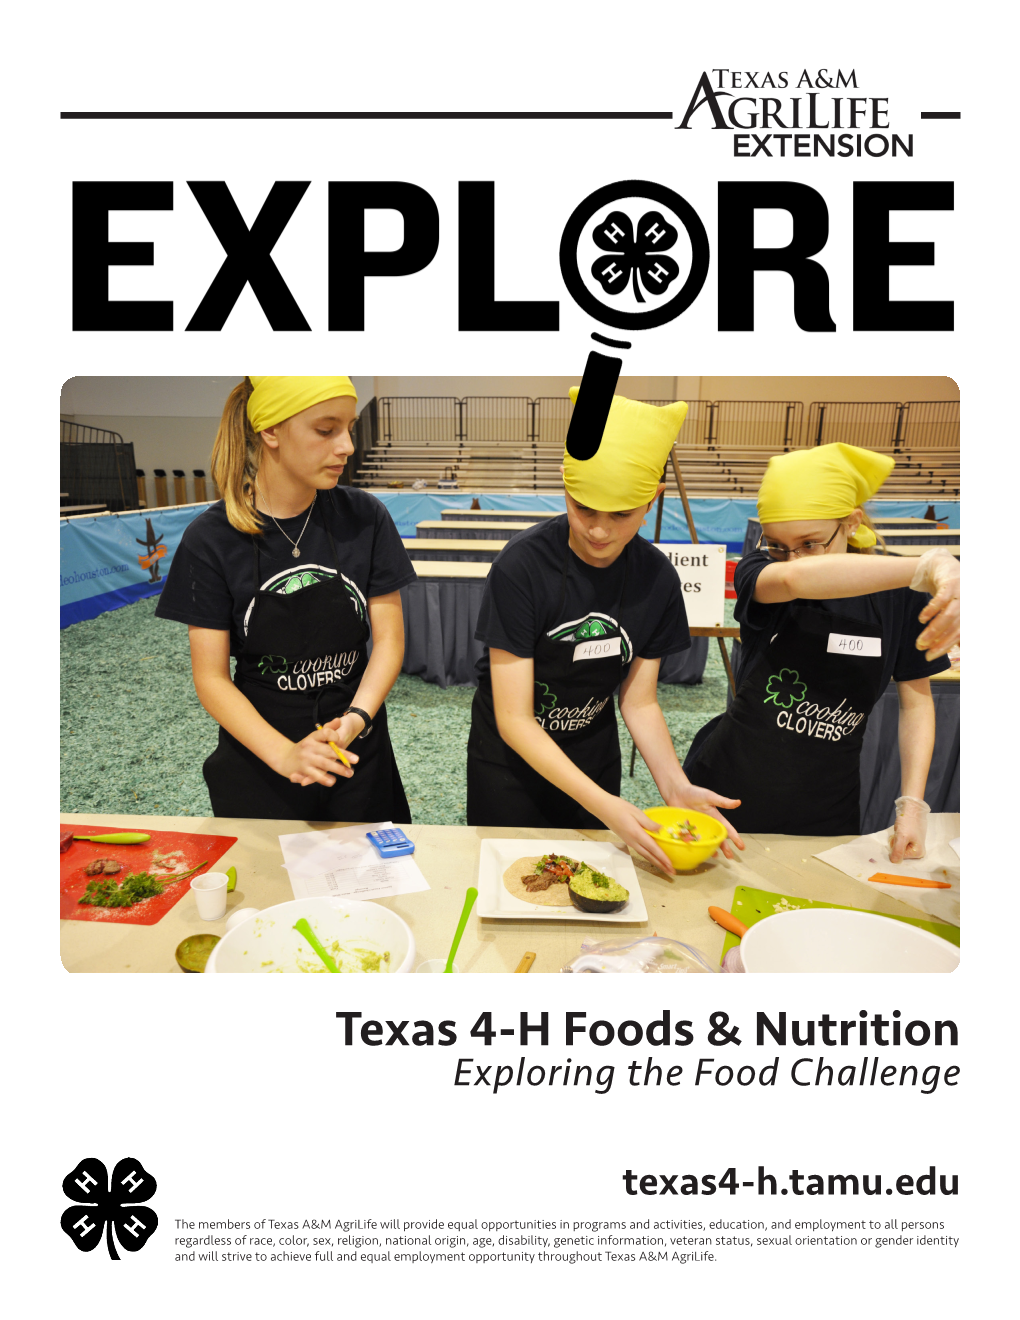 Texas 4-H Foods & Nutrition